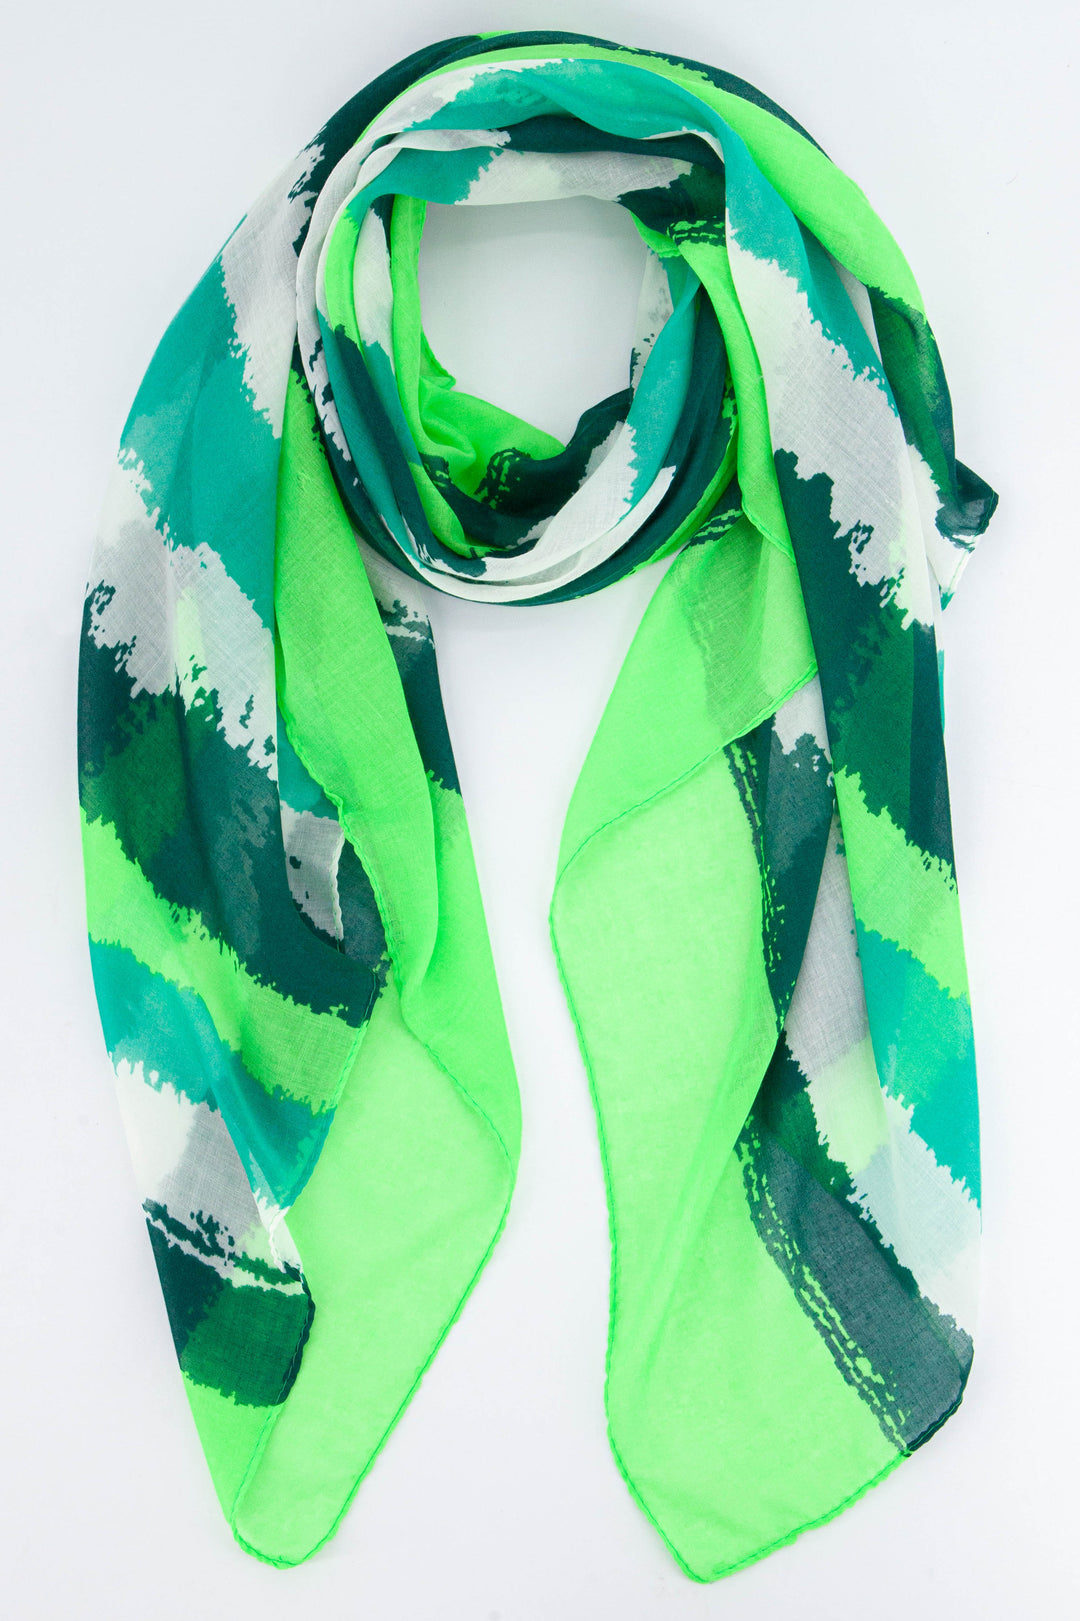 green lightweight scarf with a pattern of brushstroke stripes in an variety of green tones